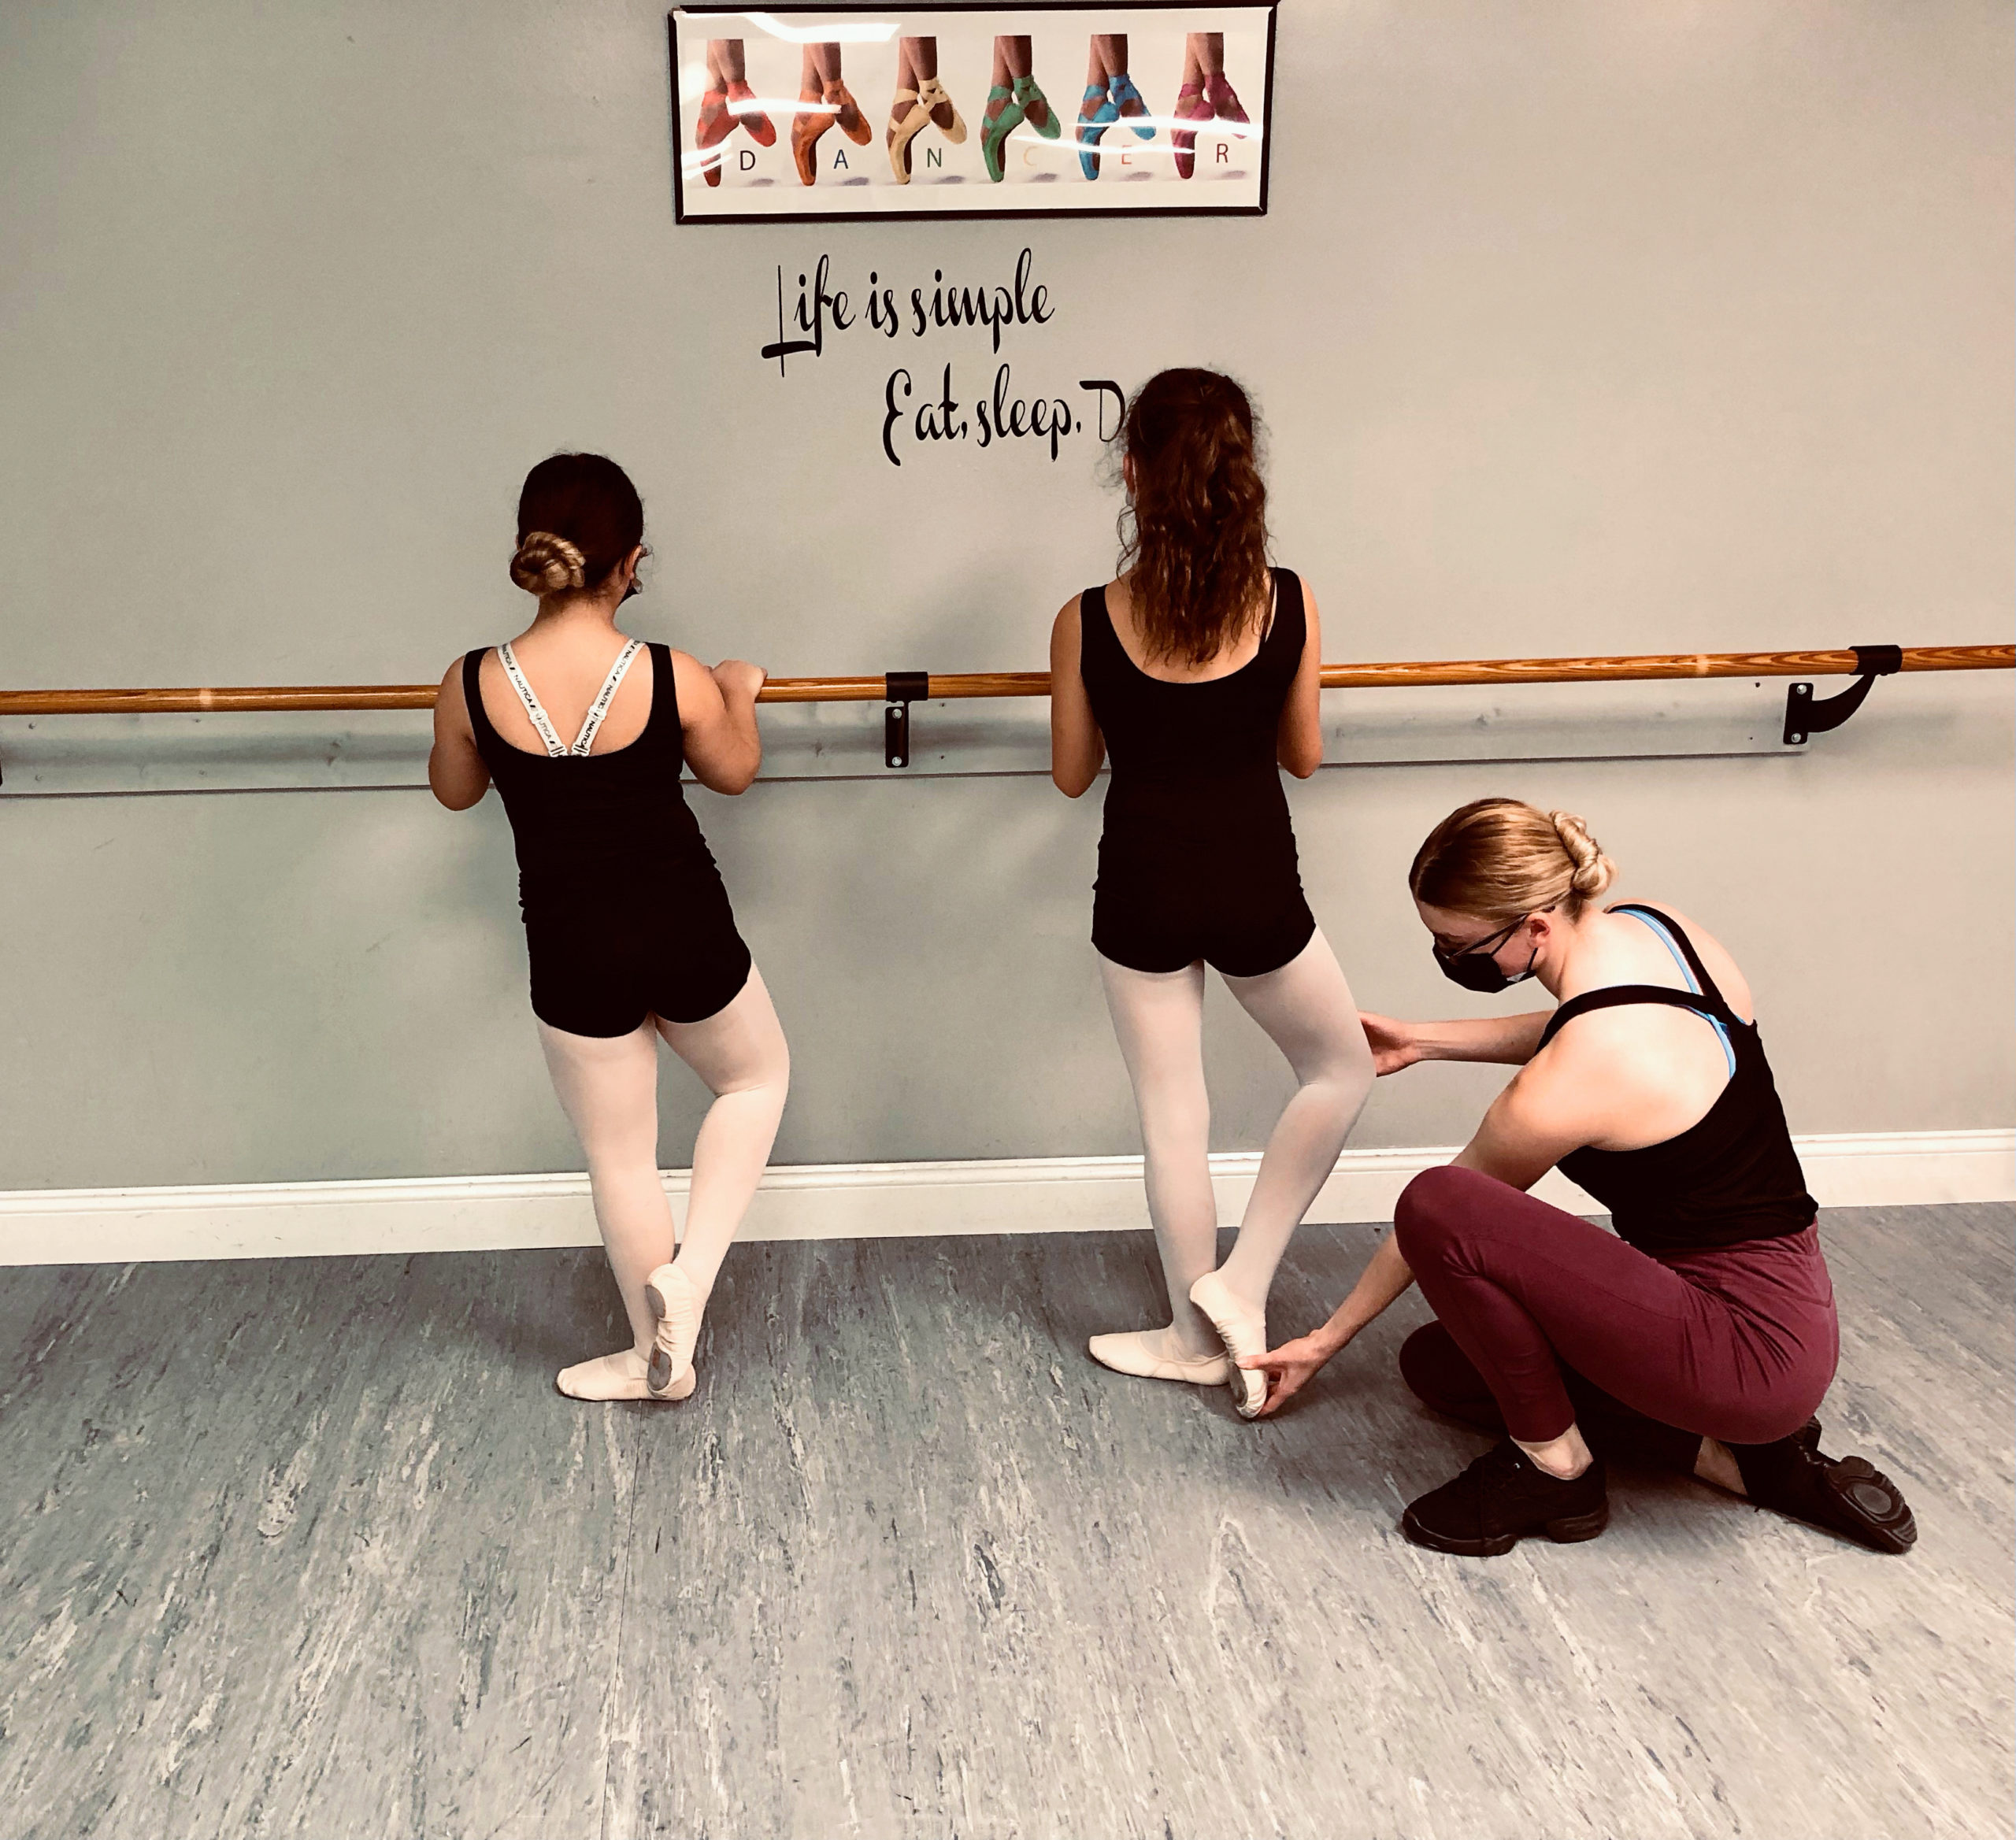 In a small dance studio, two little girls are shown at the barre practicing coupé derriere with their right foot. Their ballet teacher, wearing a black face mask, black leotard and burgundy leggings, crouches down to corrects the foot of the girl on the right.